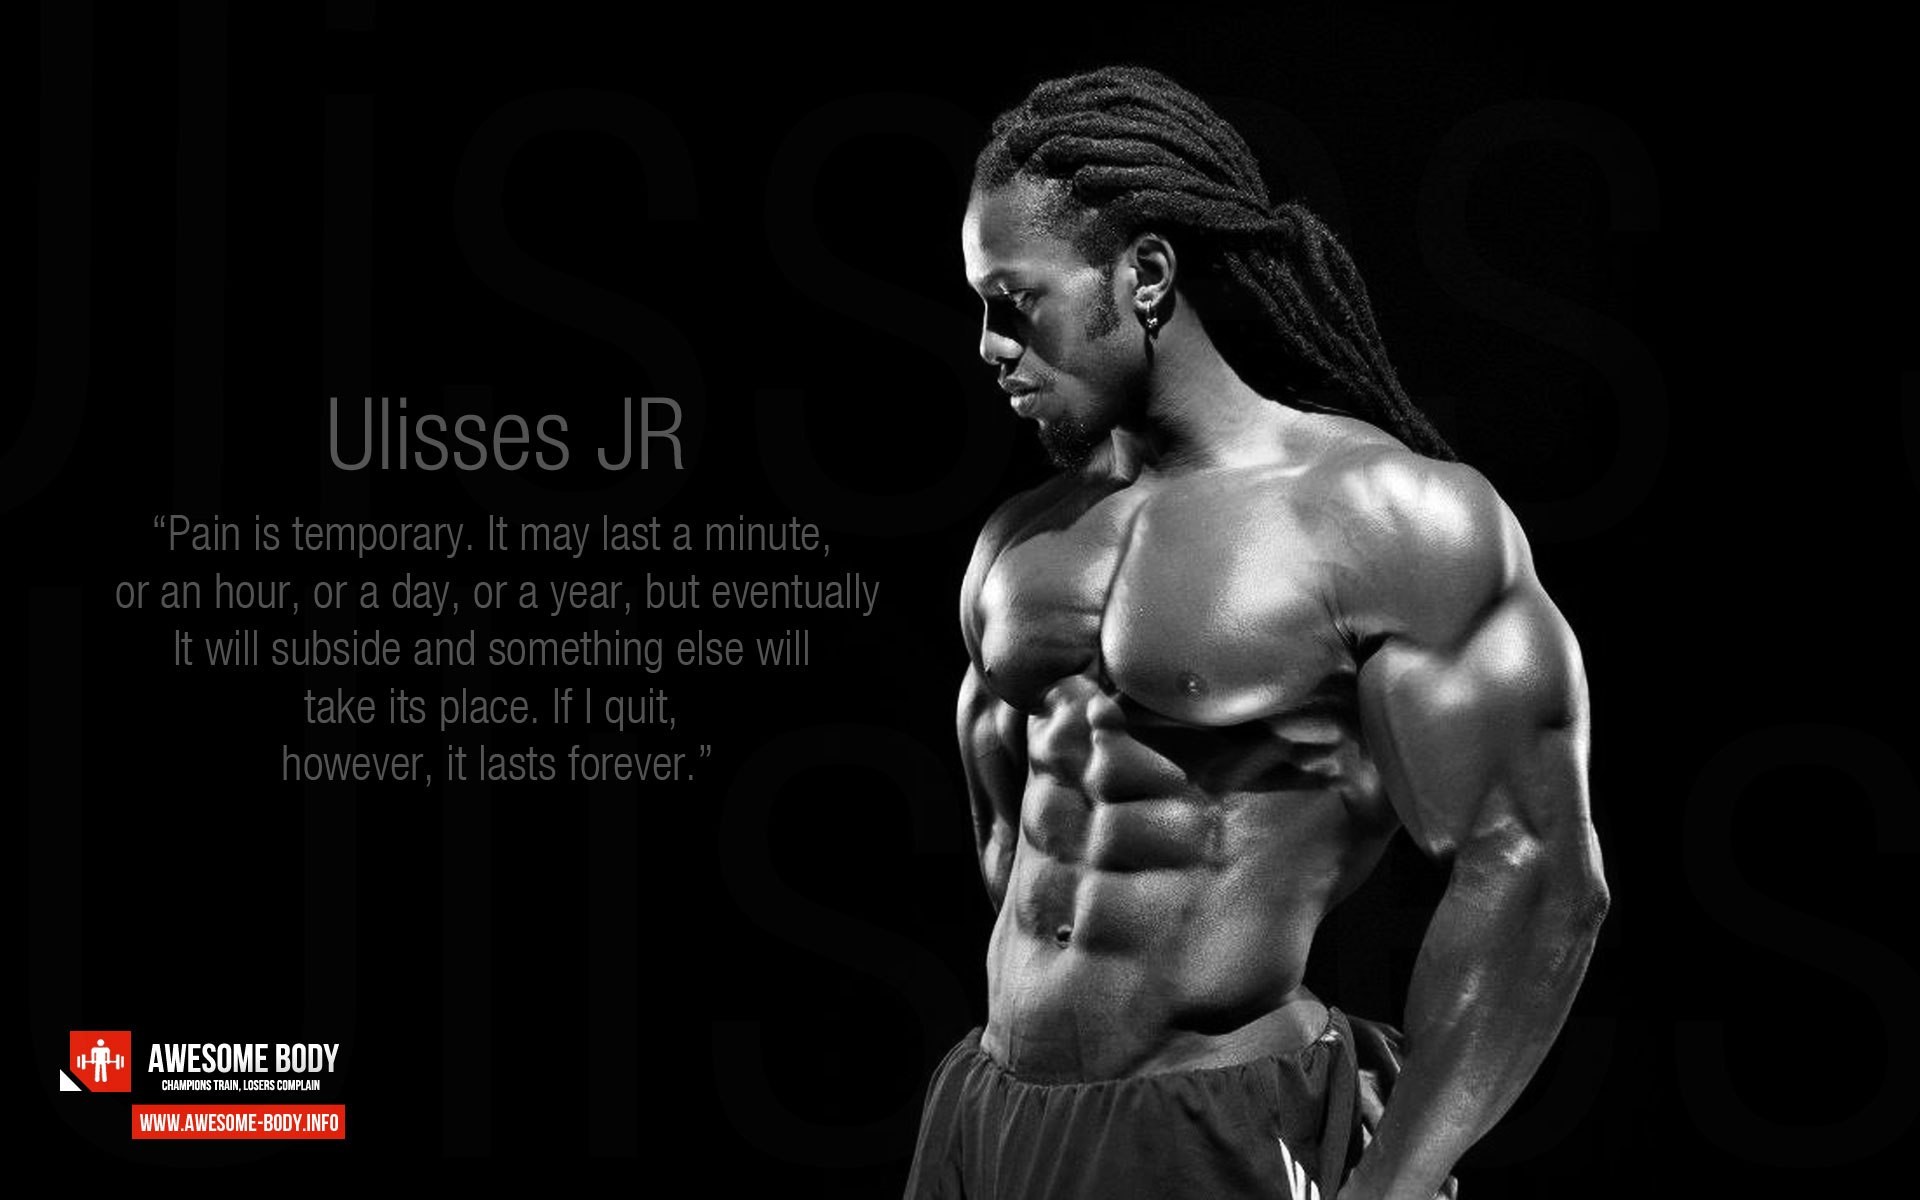 Ulisses JR Motivation awesome body wallpaper.